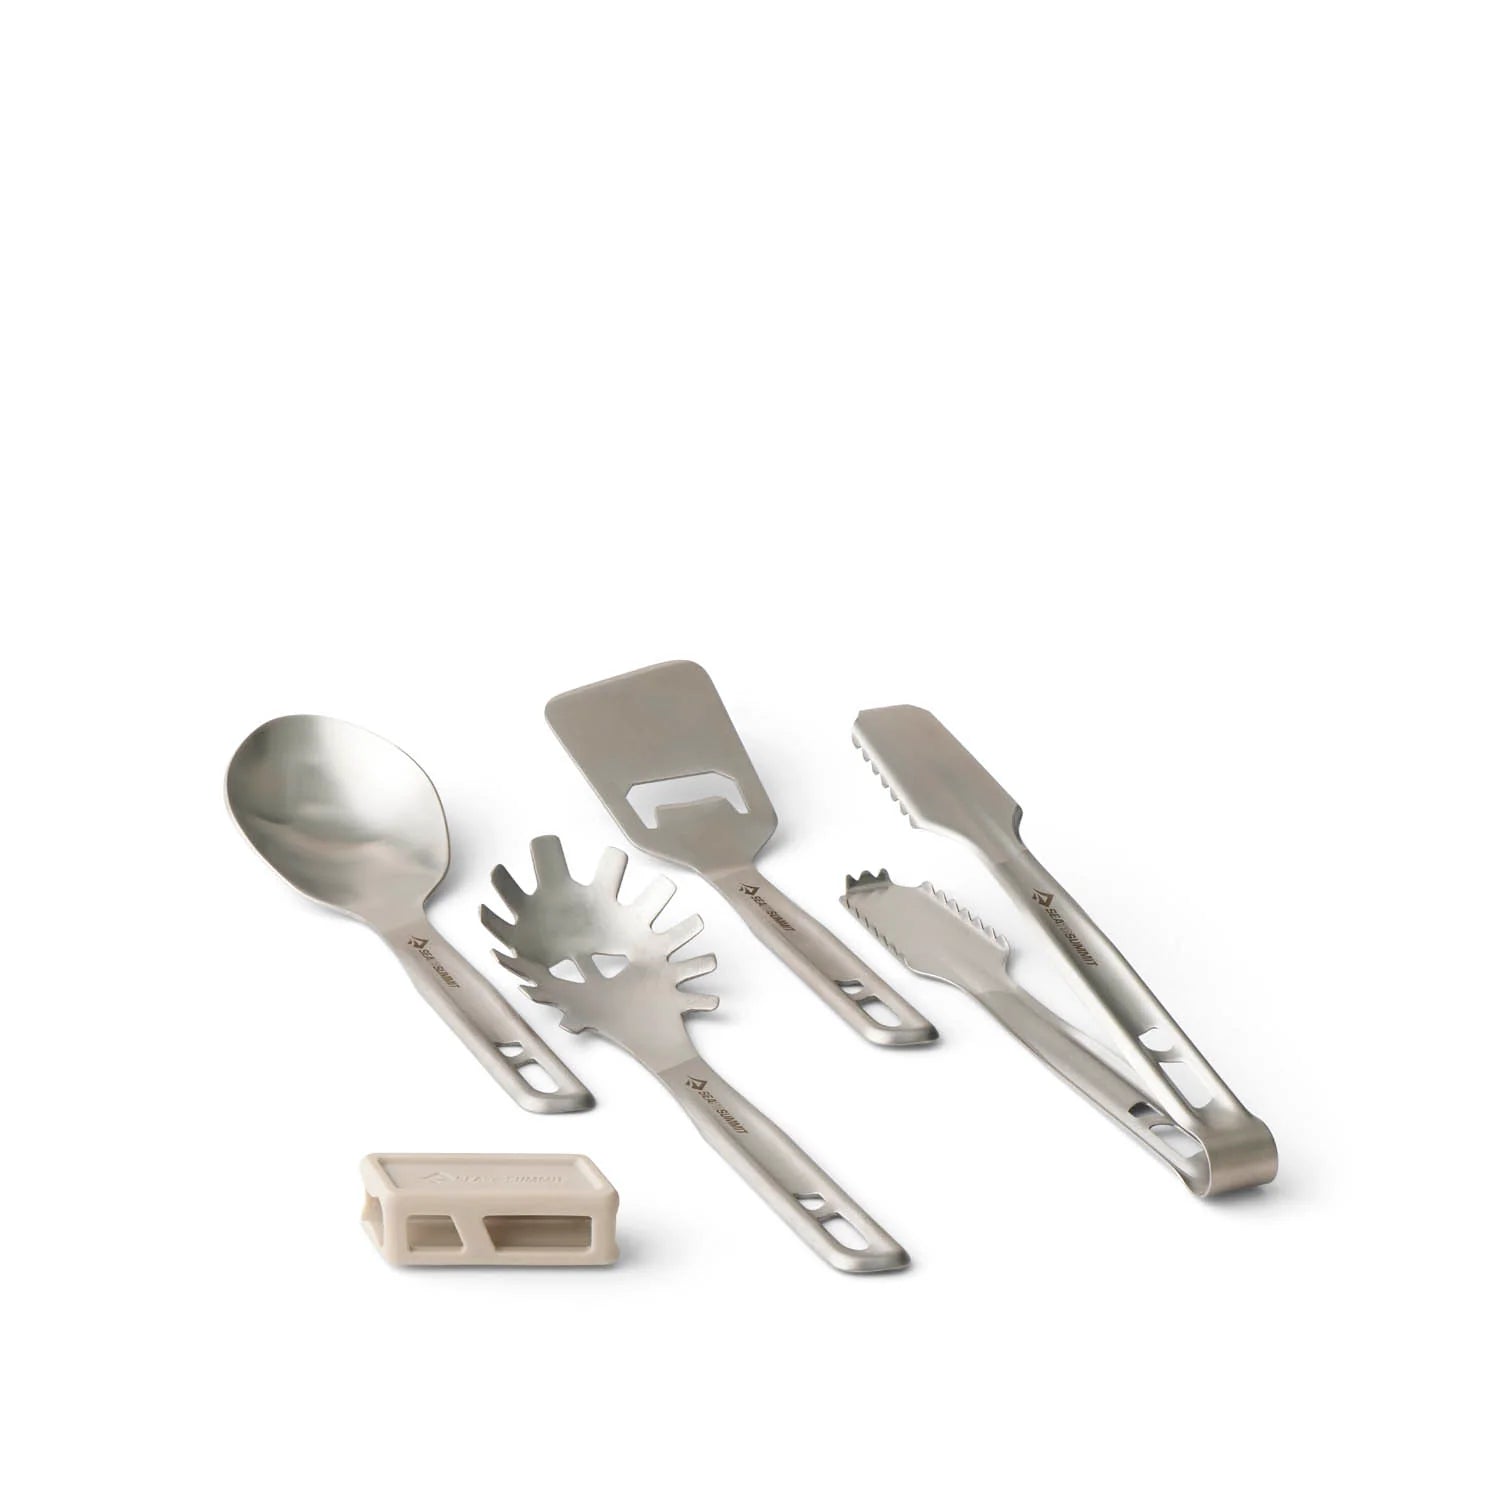 Sea to Summit Detour Stainless Steel Utensil Set - 4 Piece -  - Mansfield Hunting & Fishing - Products to prepare for Corona Virus